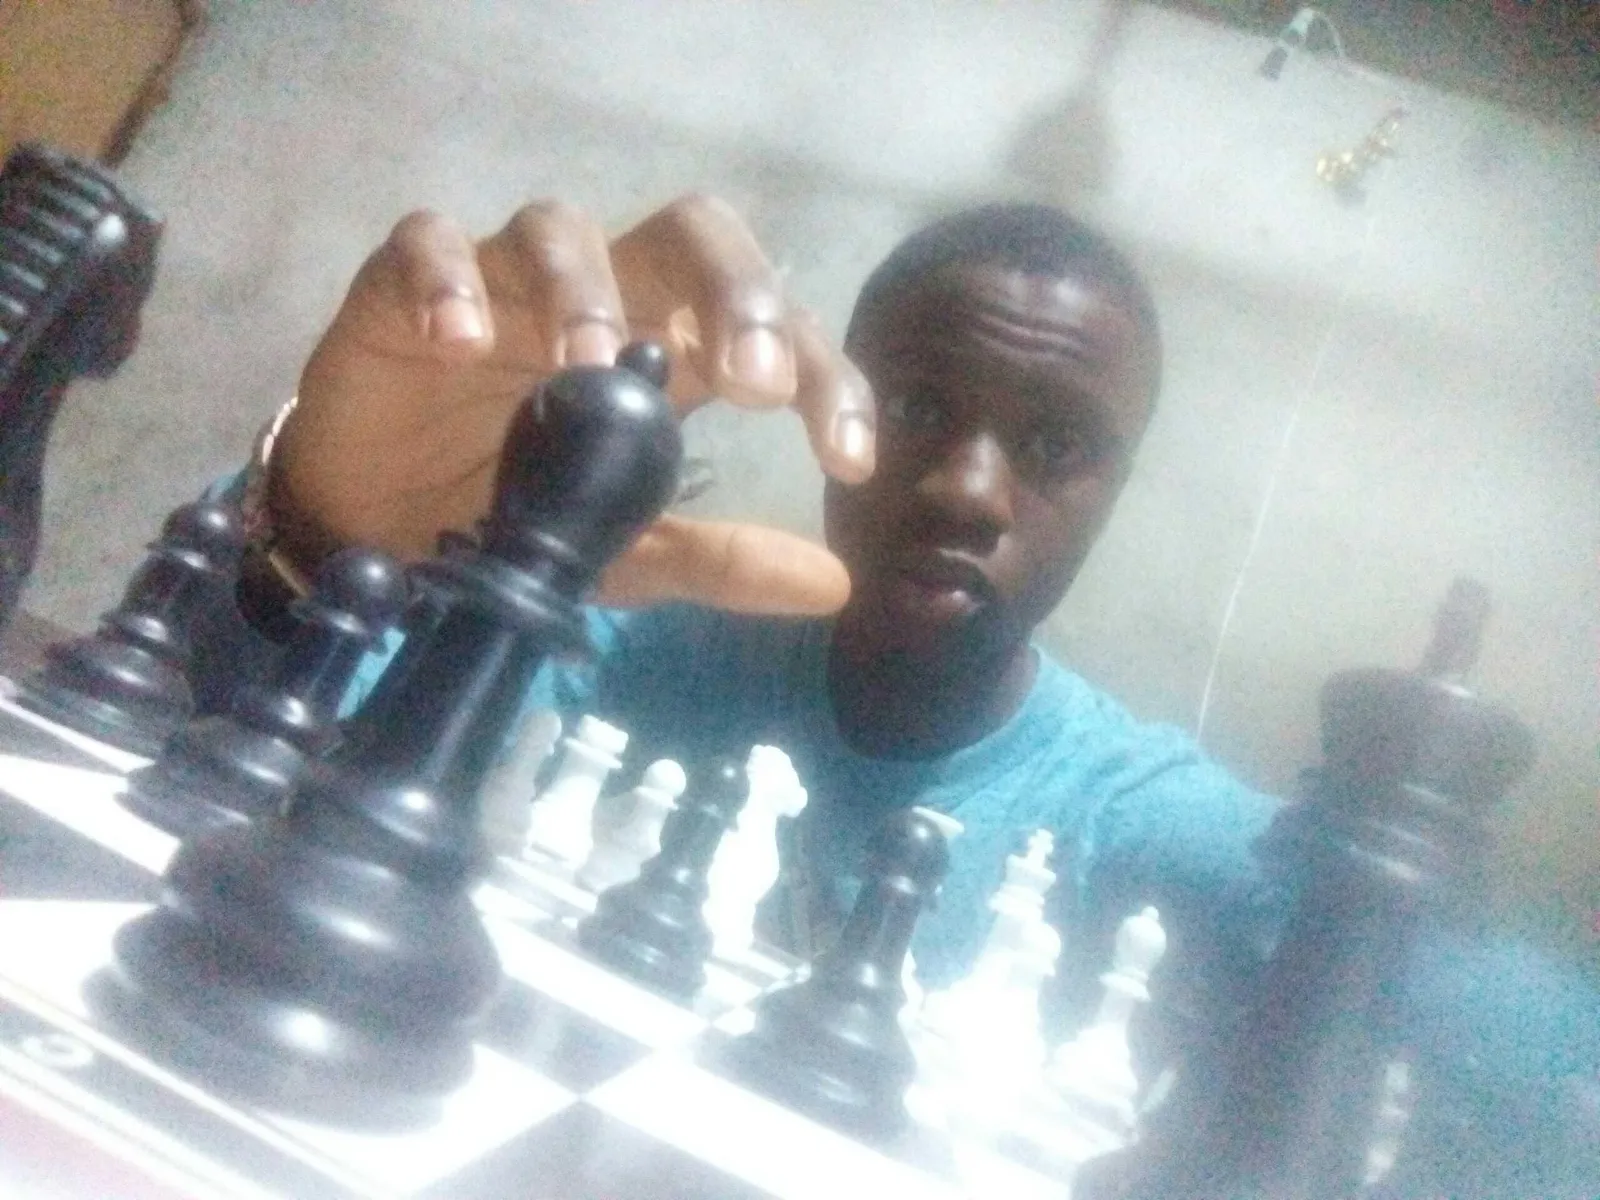 CHESS and Game of Life — Steemit